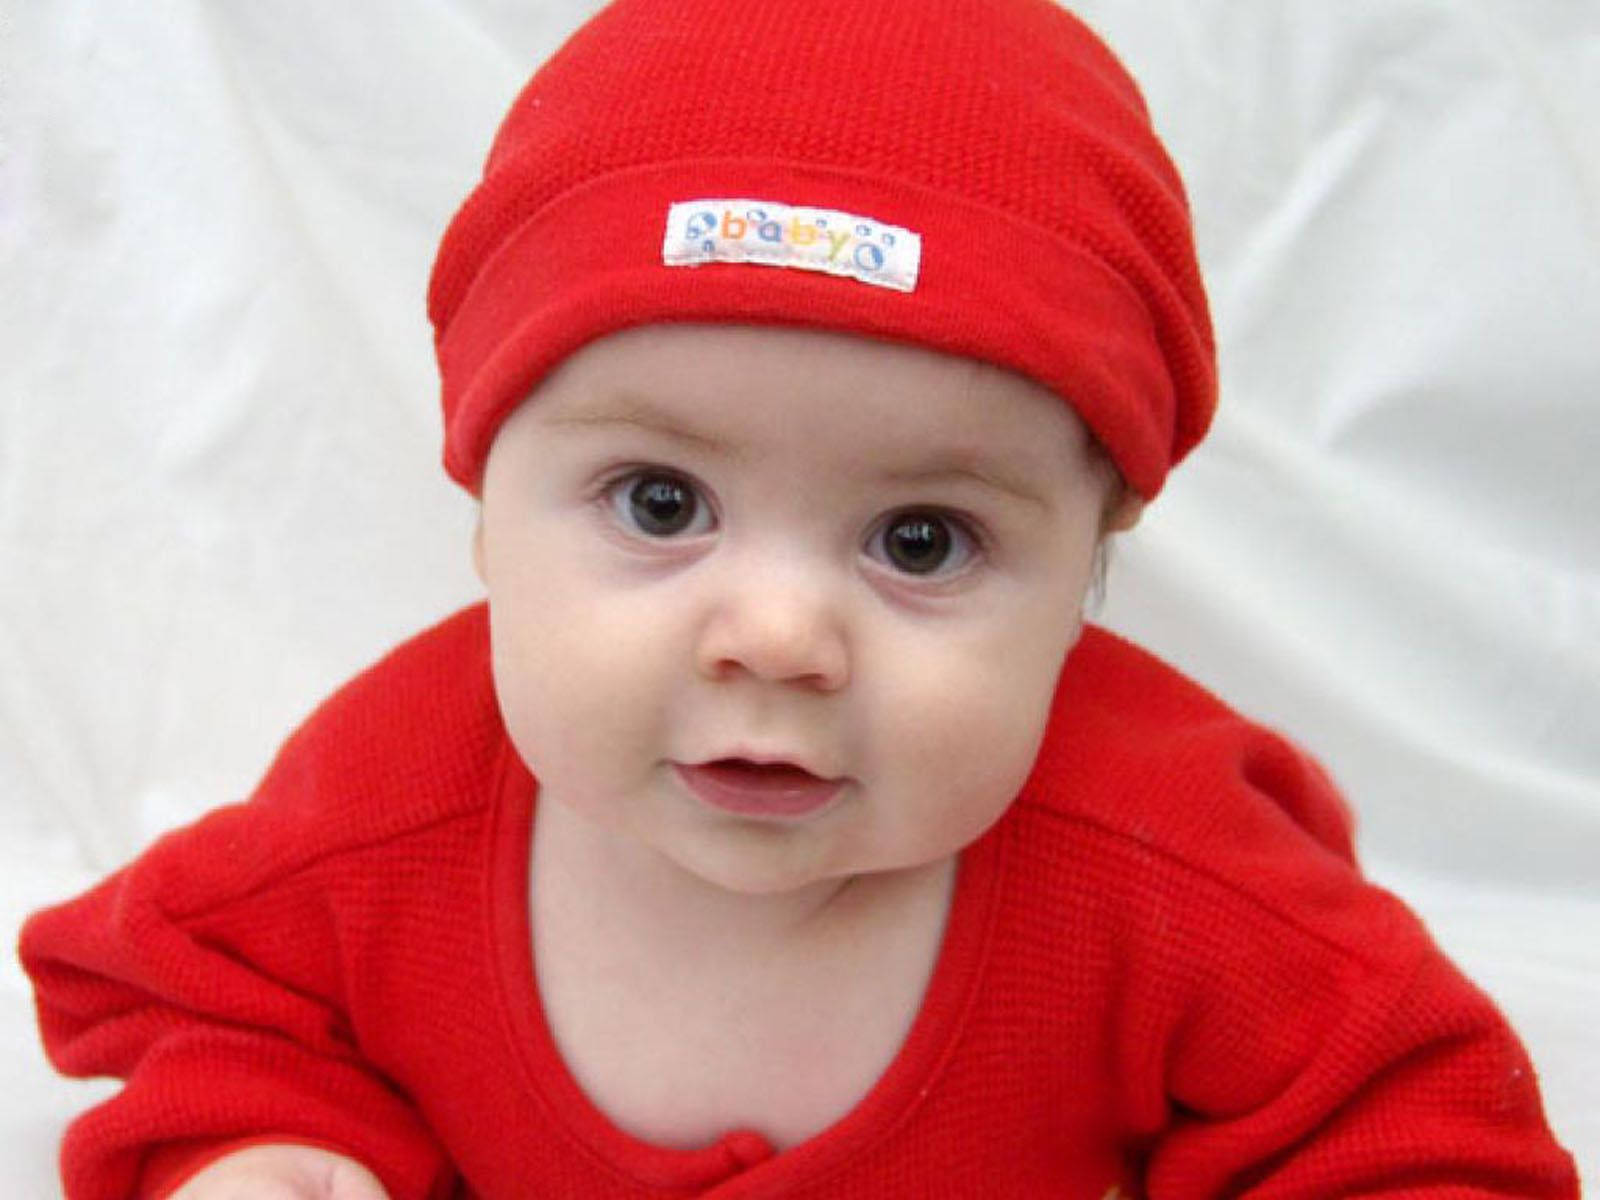 Baby In Red Outfit Is Ready For Playtime